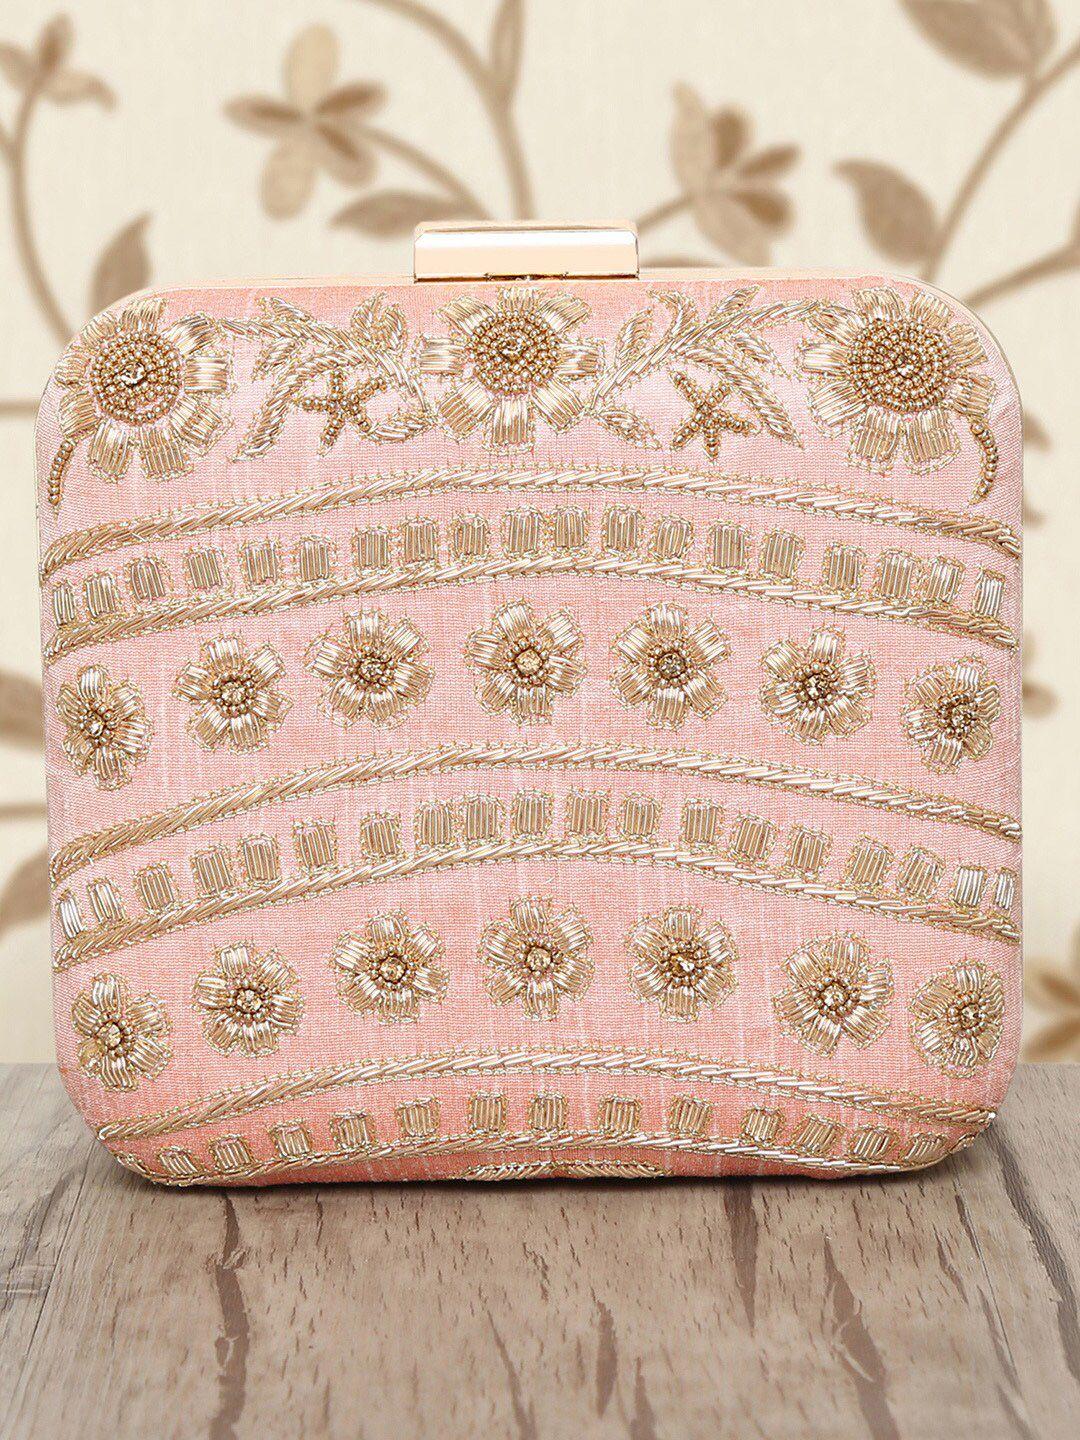 peora peach-coloured & gold-toned embellished purse clutch